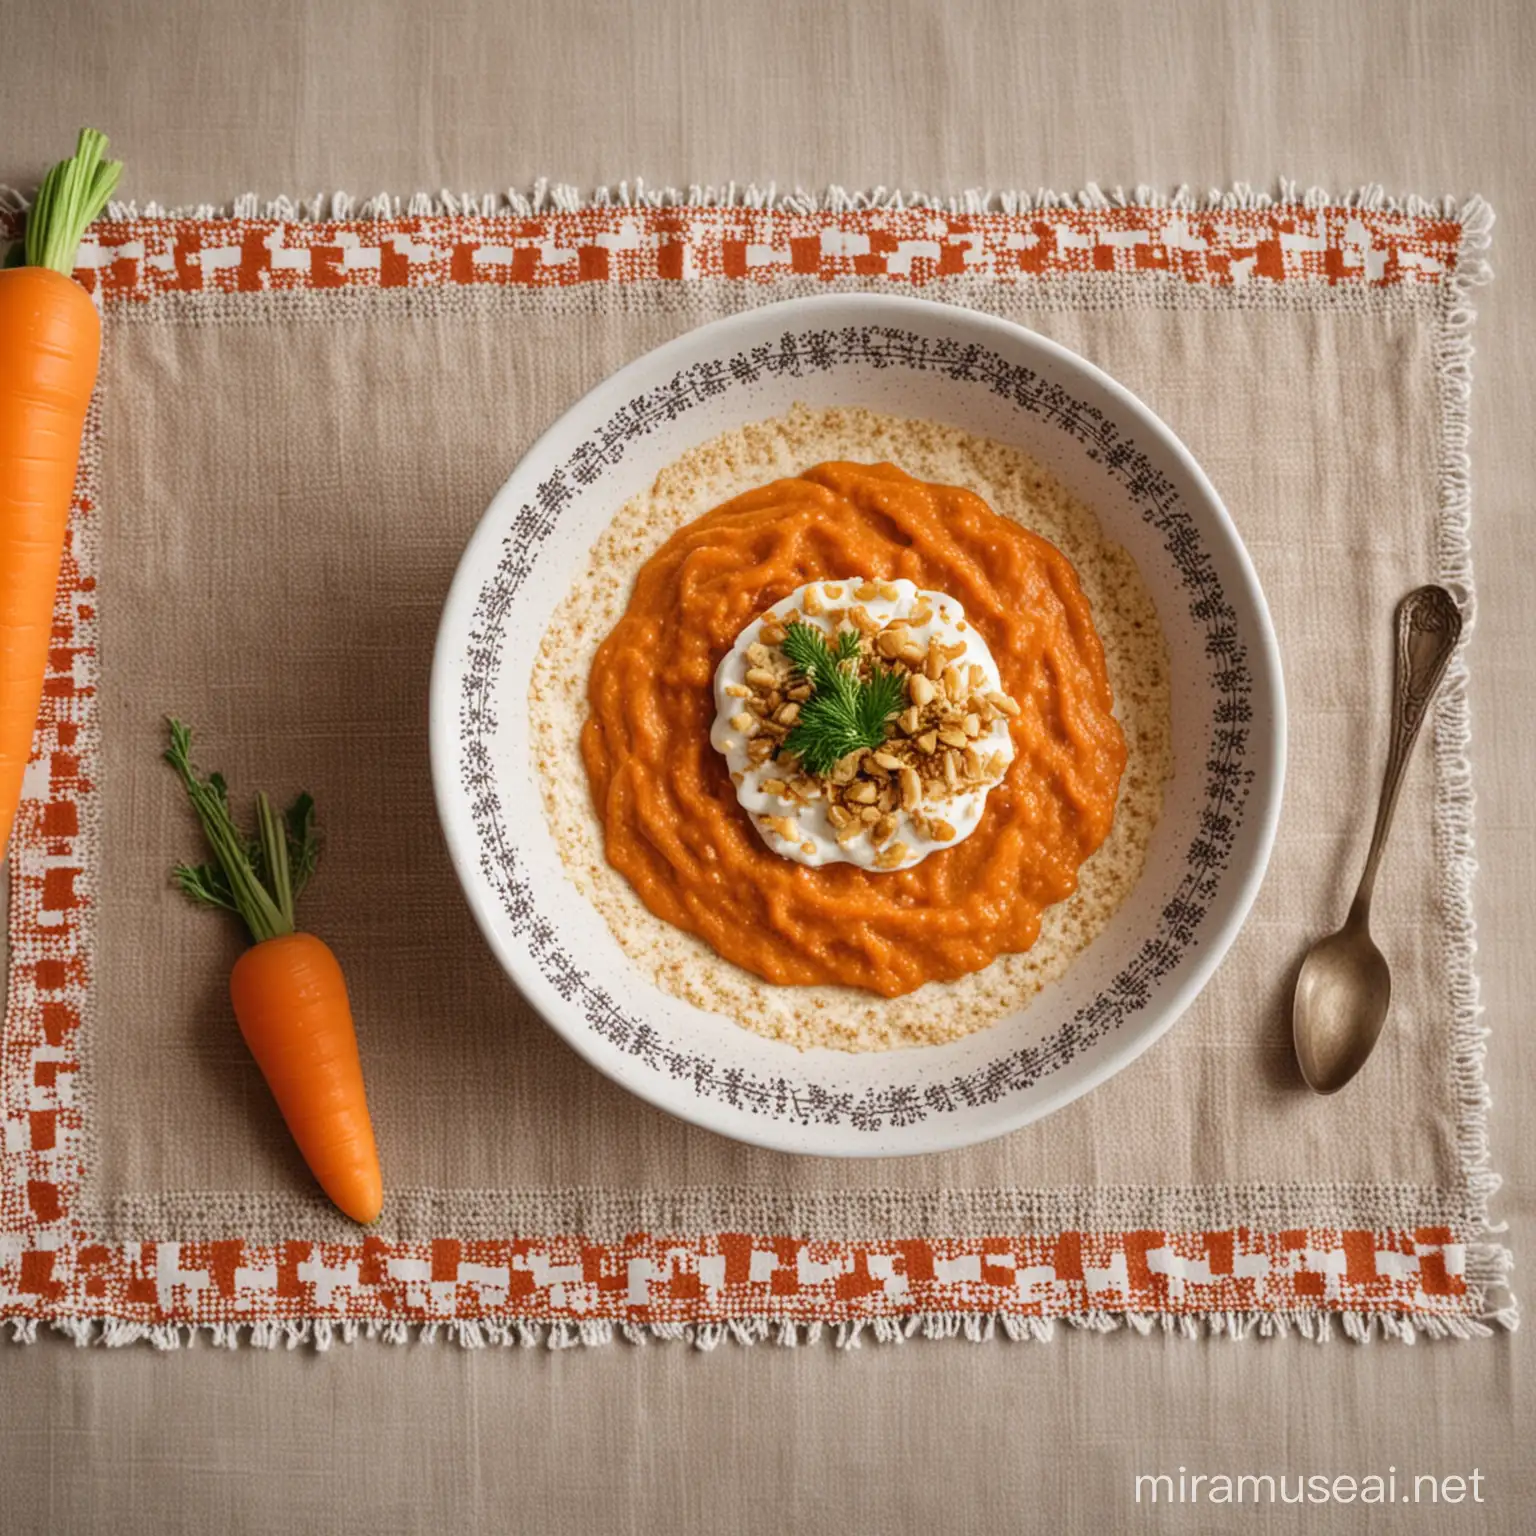 Carrot Porridge in a bowl on a table with a fancy tablecloth